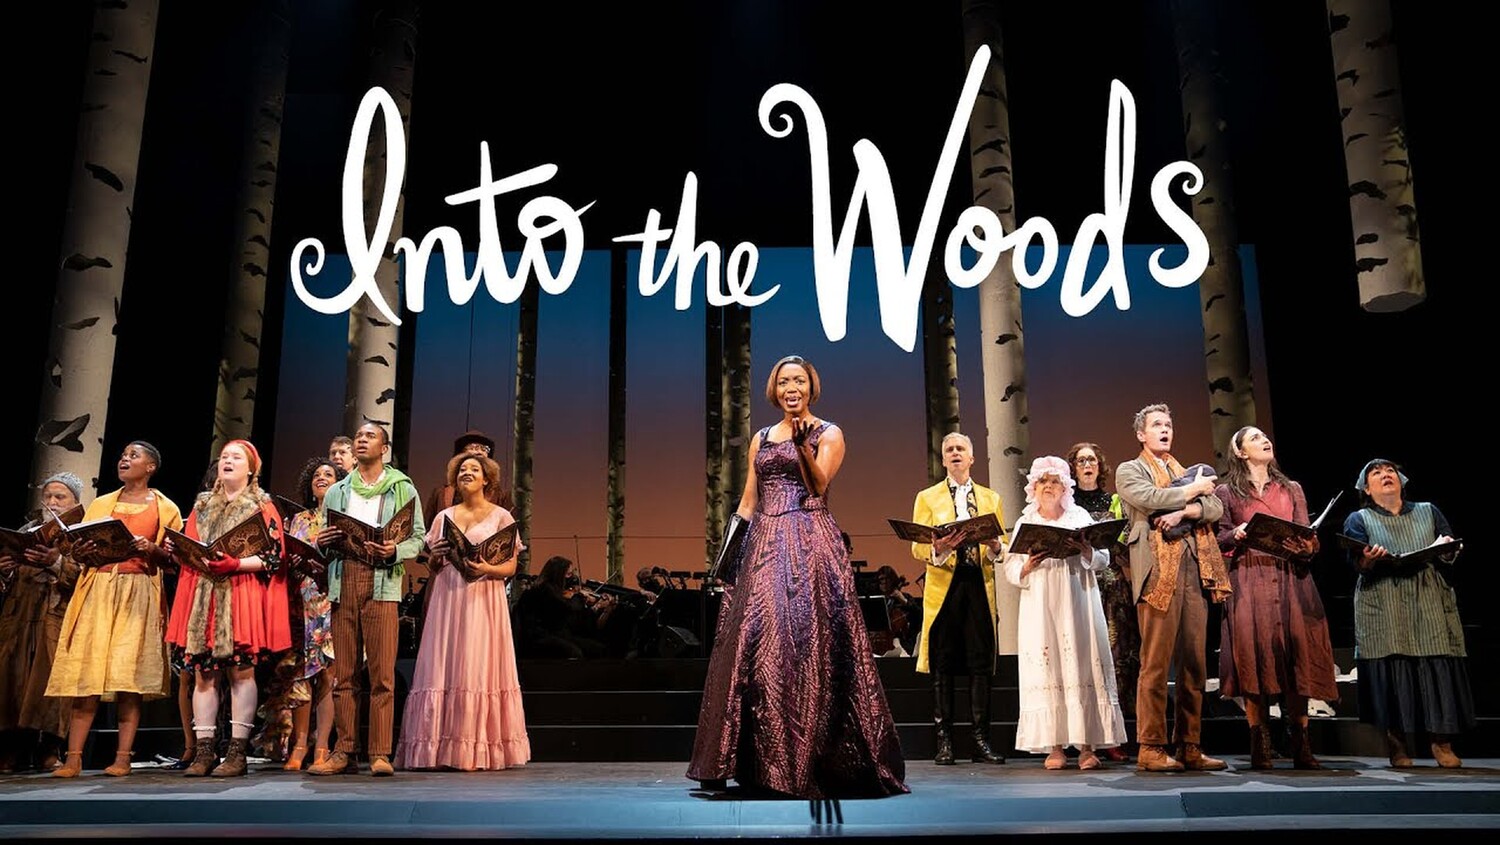 Heather Headley & the cast of Into the Woods
(Photo: Joan Marcus)